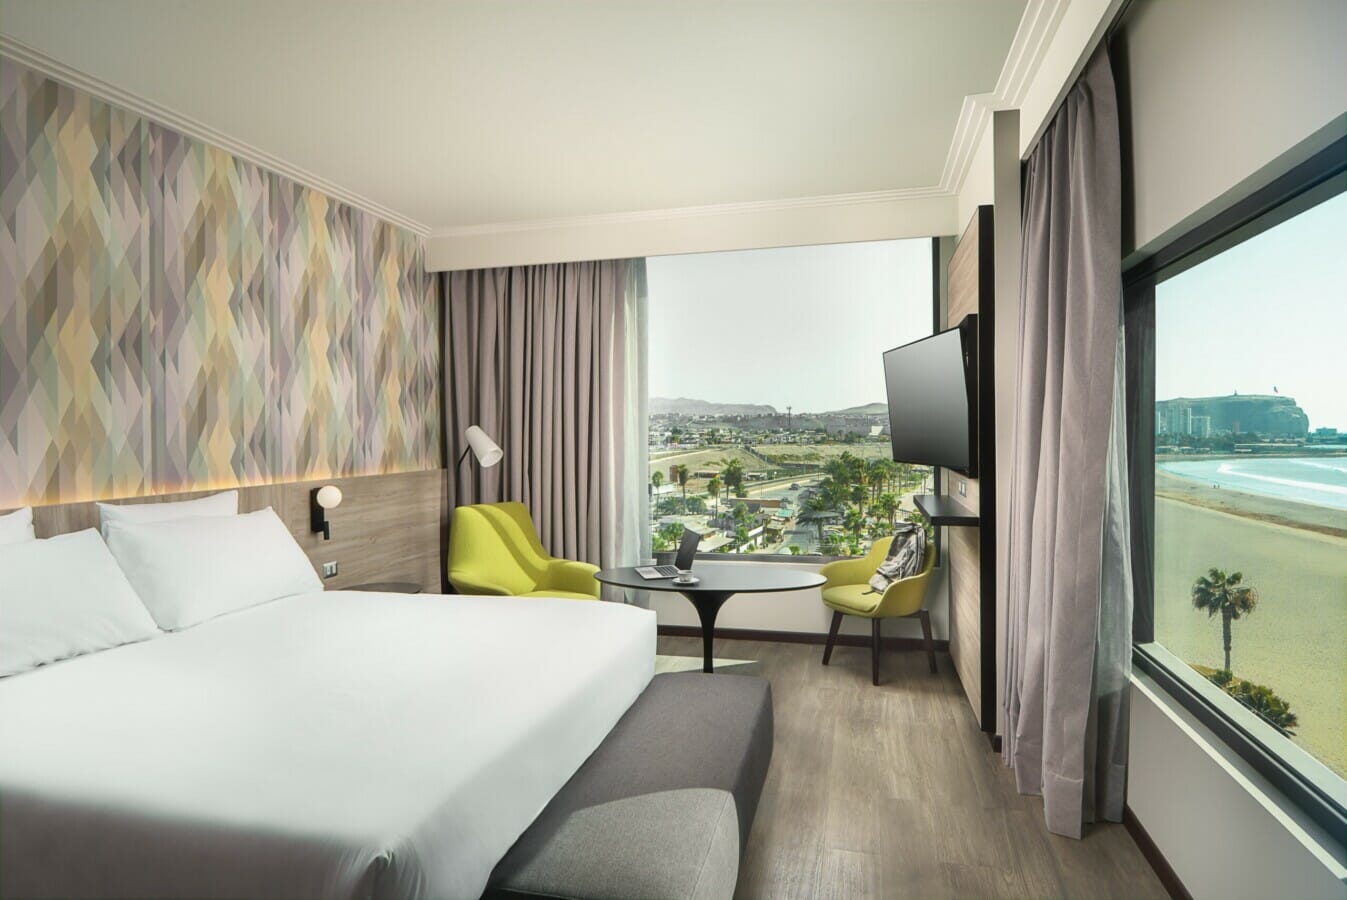 Novotel Arica aspires to become the favourite of locals and visitors to the city of eternal spring